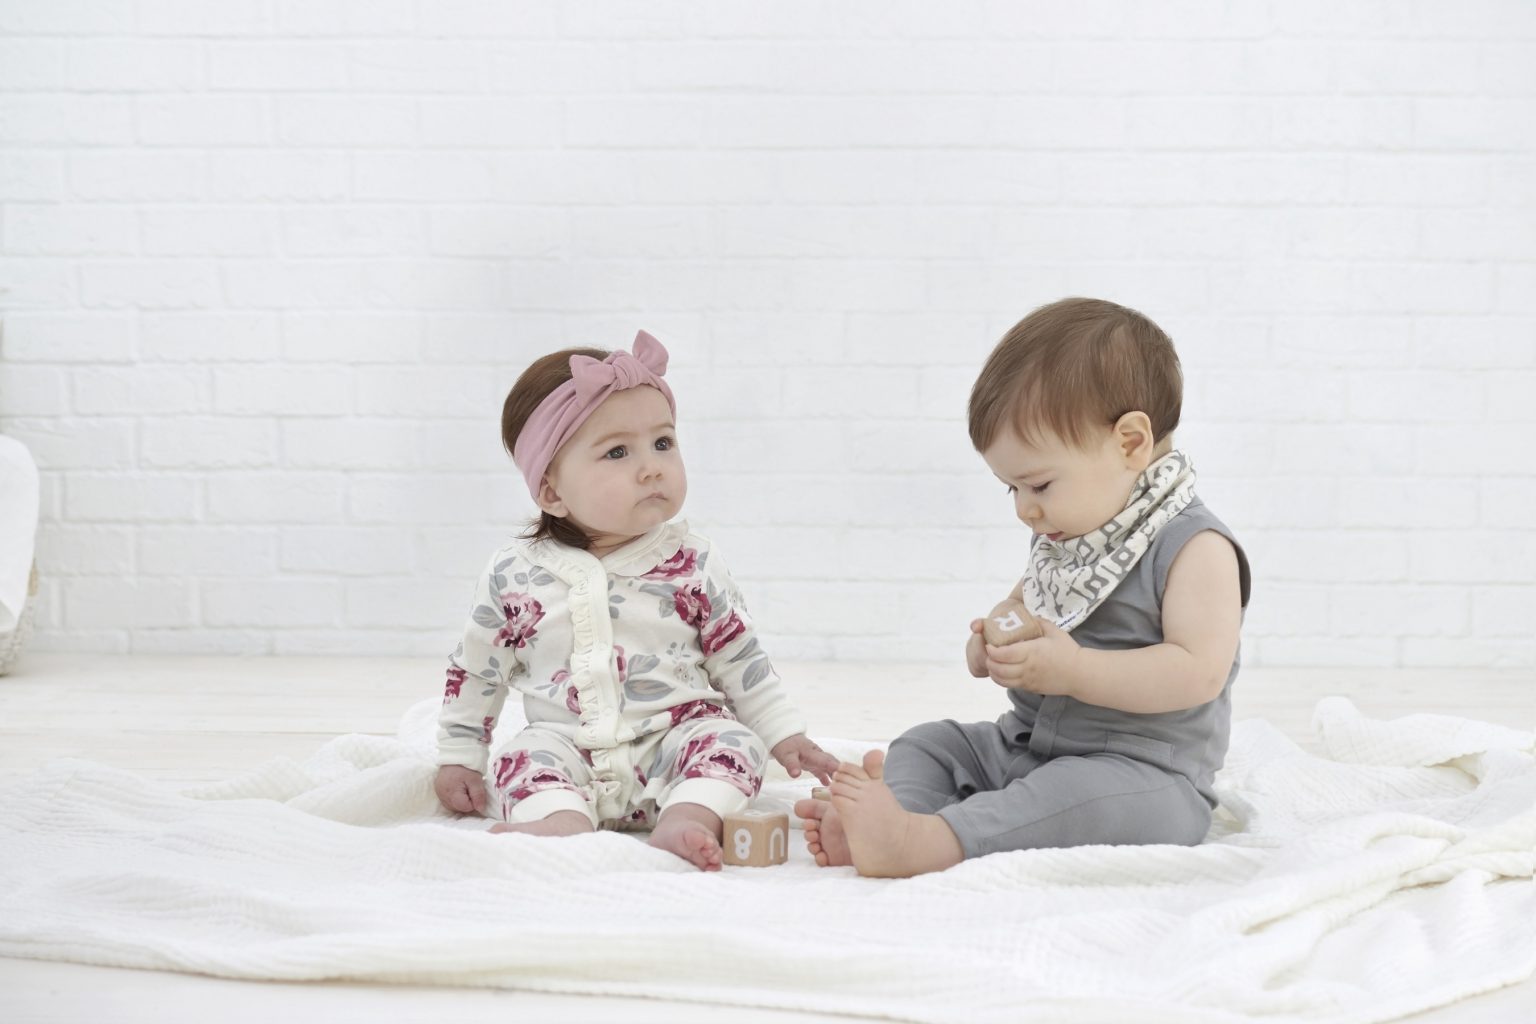 Gerber Childrenswear Launches New Elevated Line Of Baby Essentials